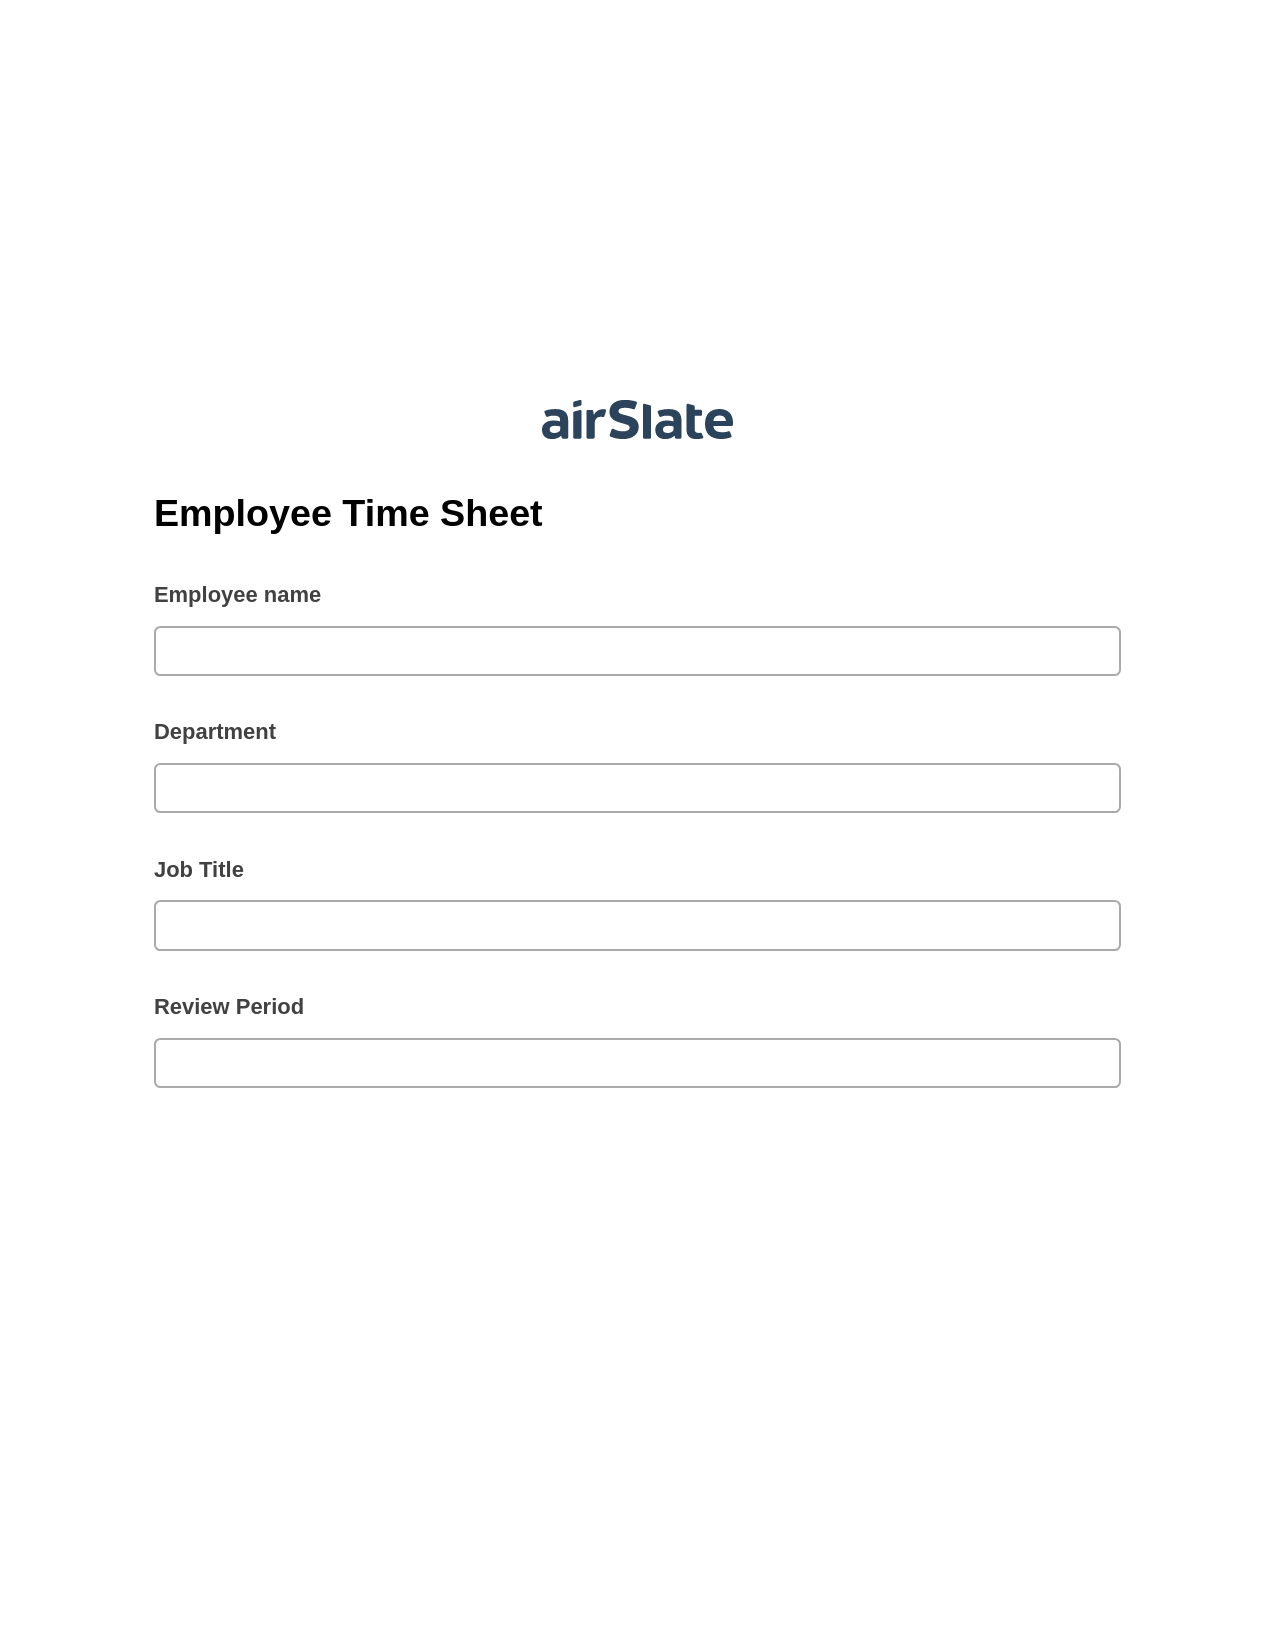 Employee Time Sheet Pre-fill Dropdowns from CSV file Bot, Create slate addon, Export to Excel 365 Bot